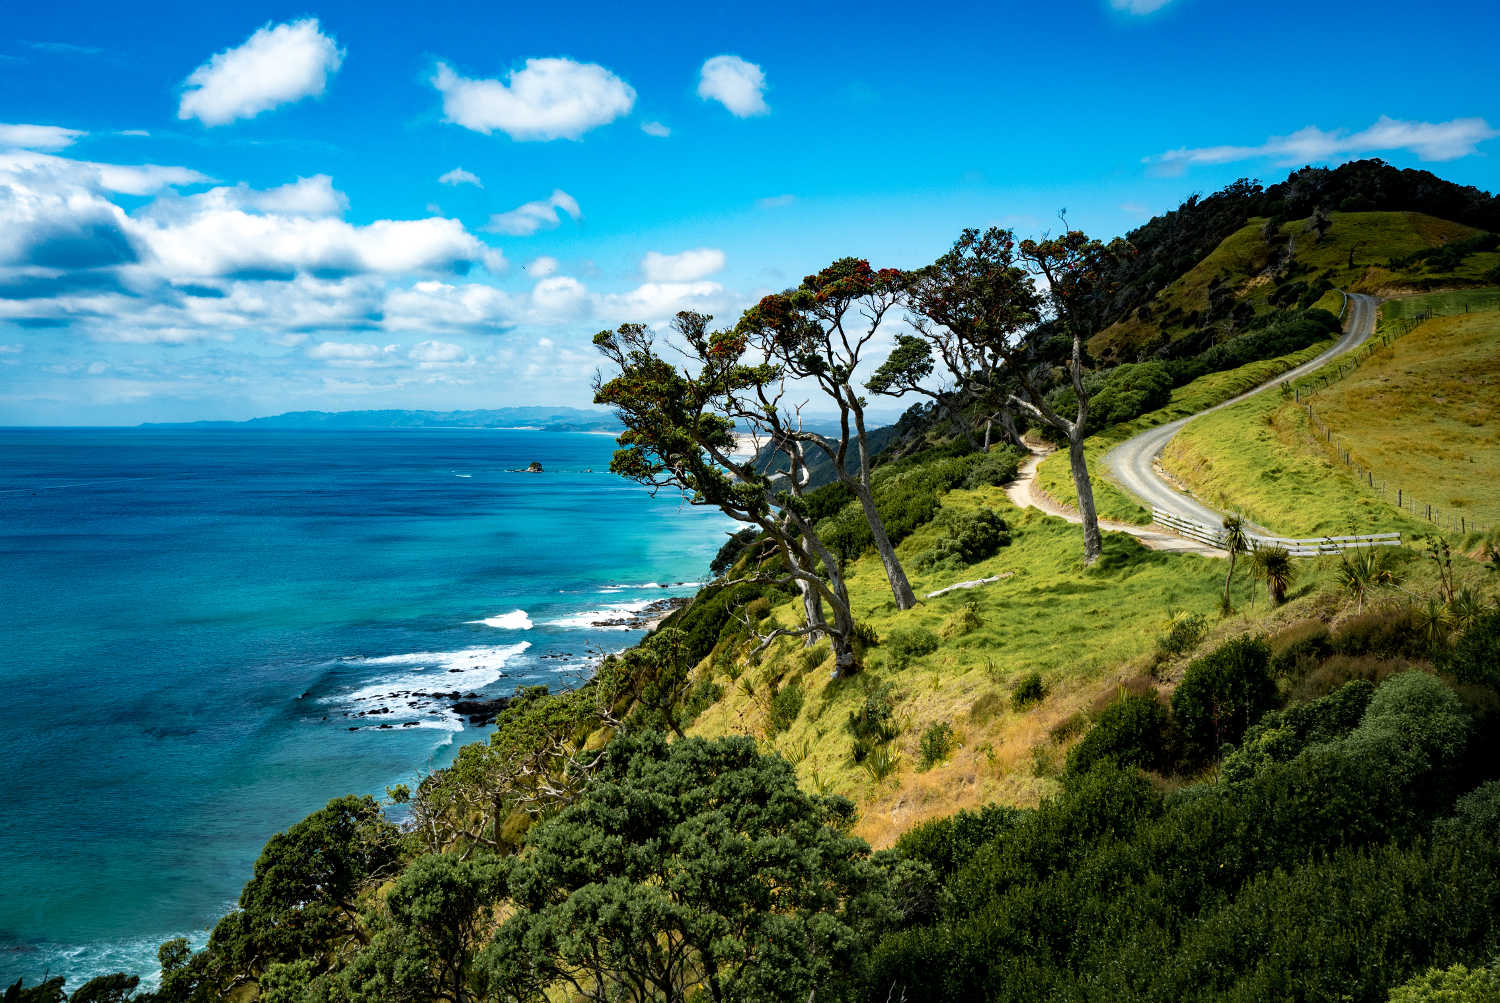 A view along the coastline of the pacific ocean from the famous mangawhai heads walk in northland new zealand1